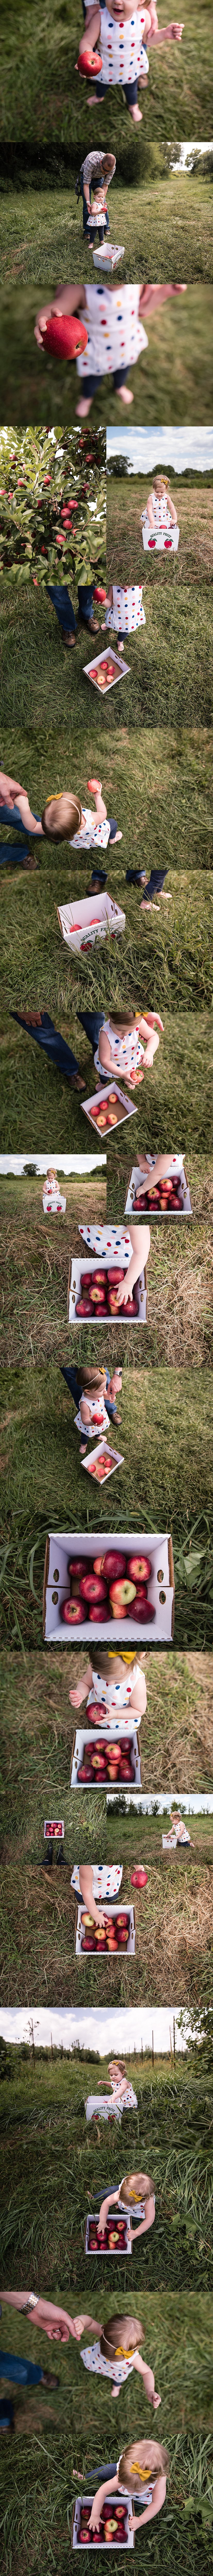 Autumn Apple Picking : Our First Fall Weekend | Bethadilly Photography